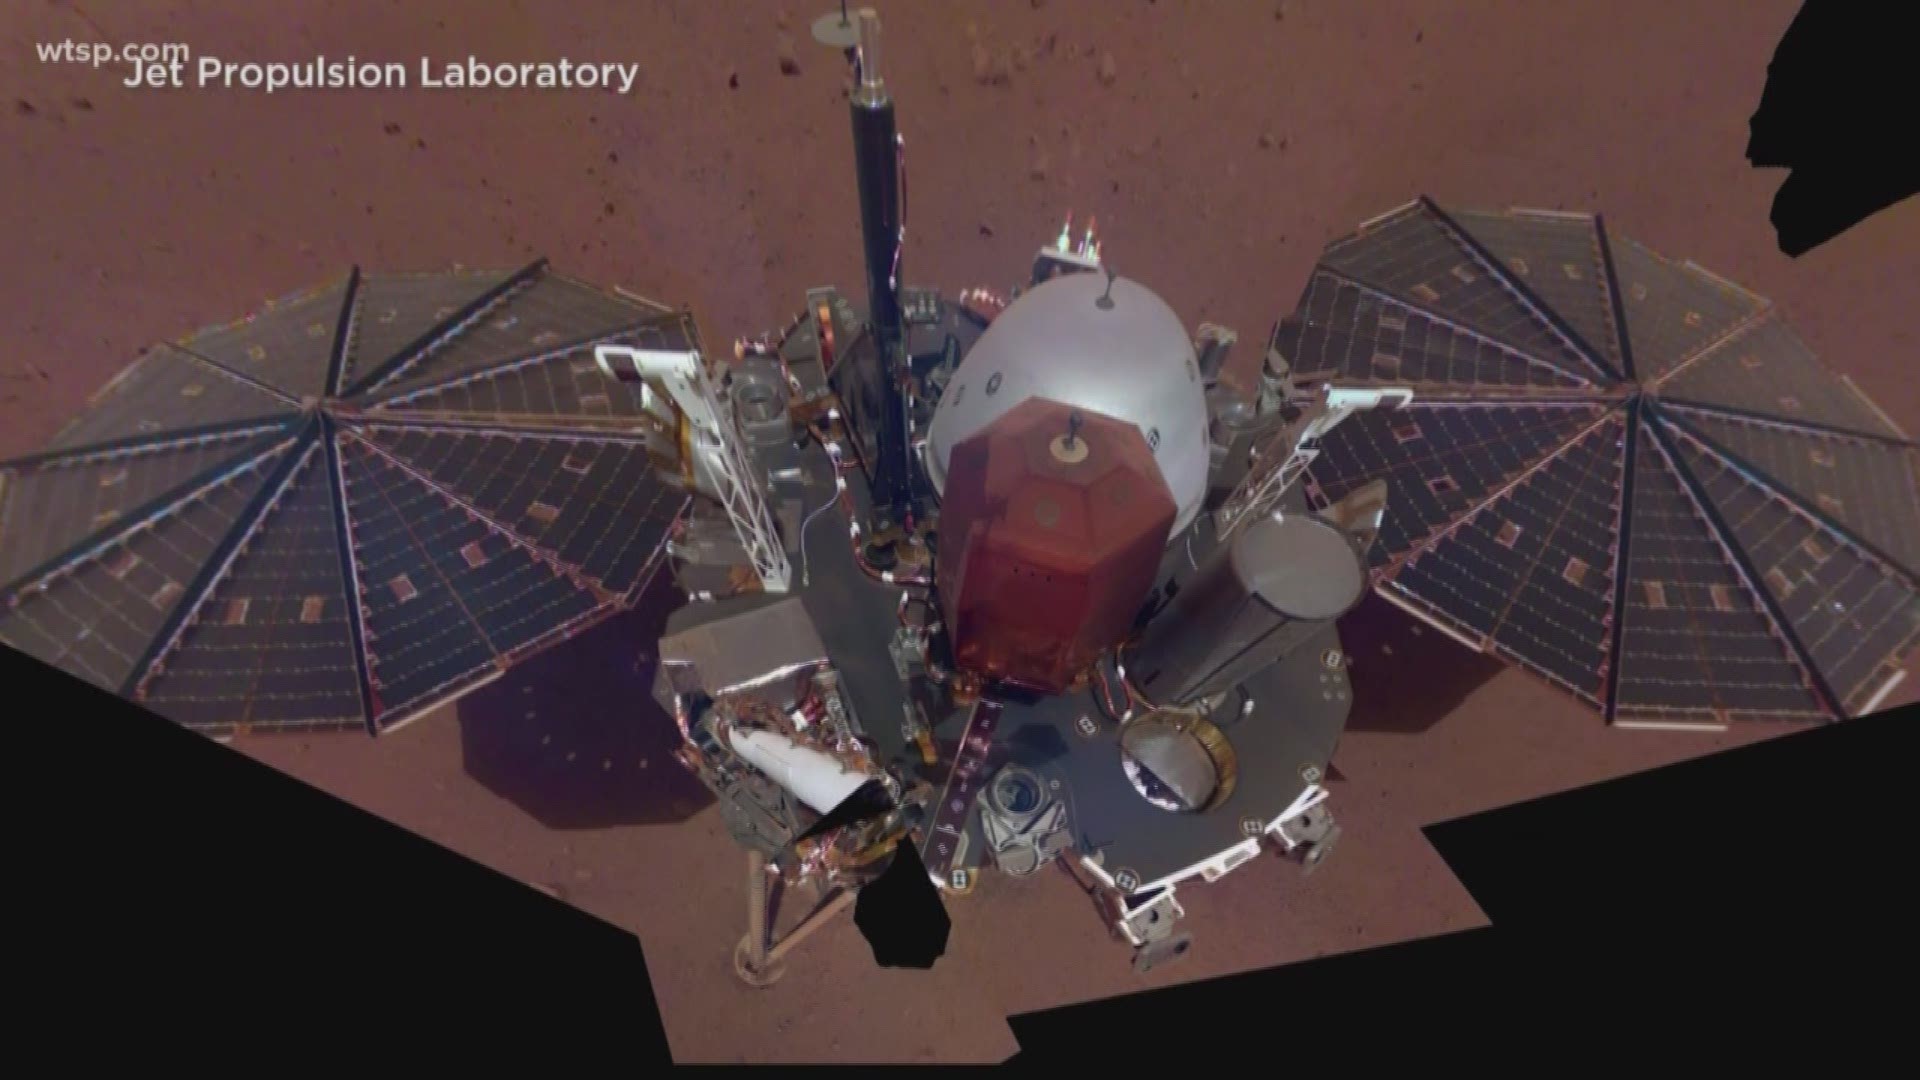 A martian dust devil hit the InSight lander. However, the NASA probe is doing just fine.